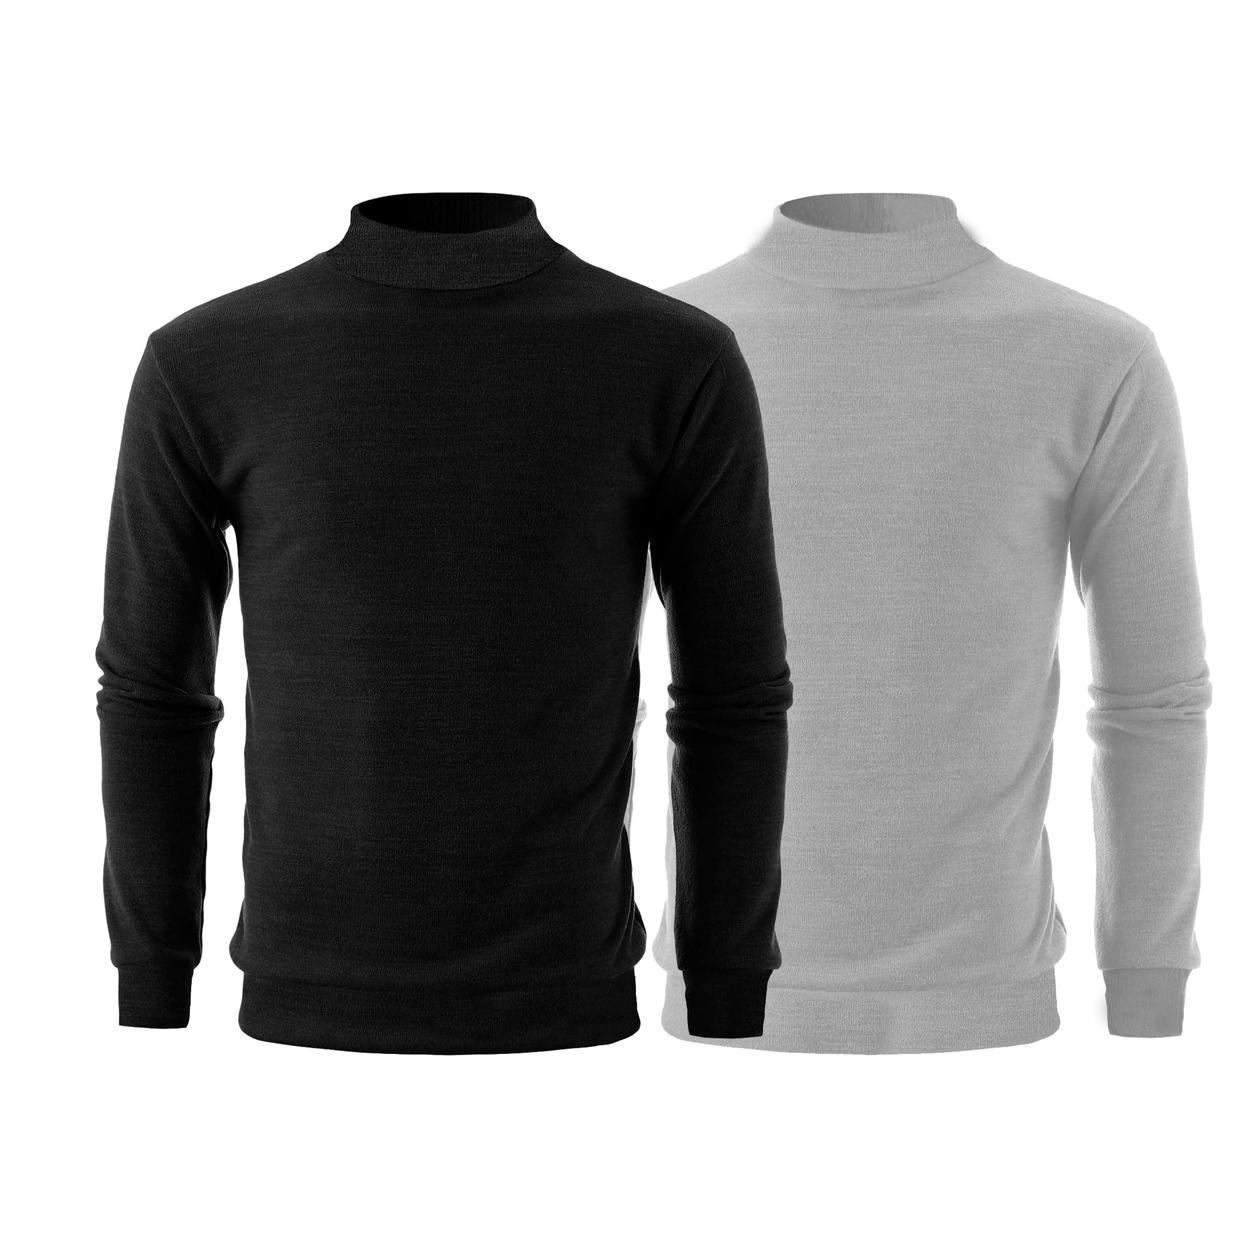 2-Pack: Men's Winter Warm Cozy Knit Slim Fit Mock Neck Sweater - White &navy, Small